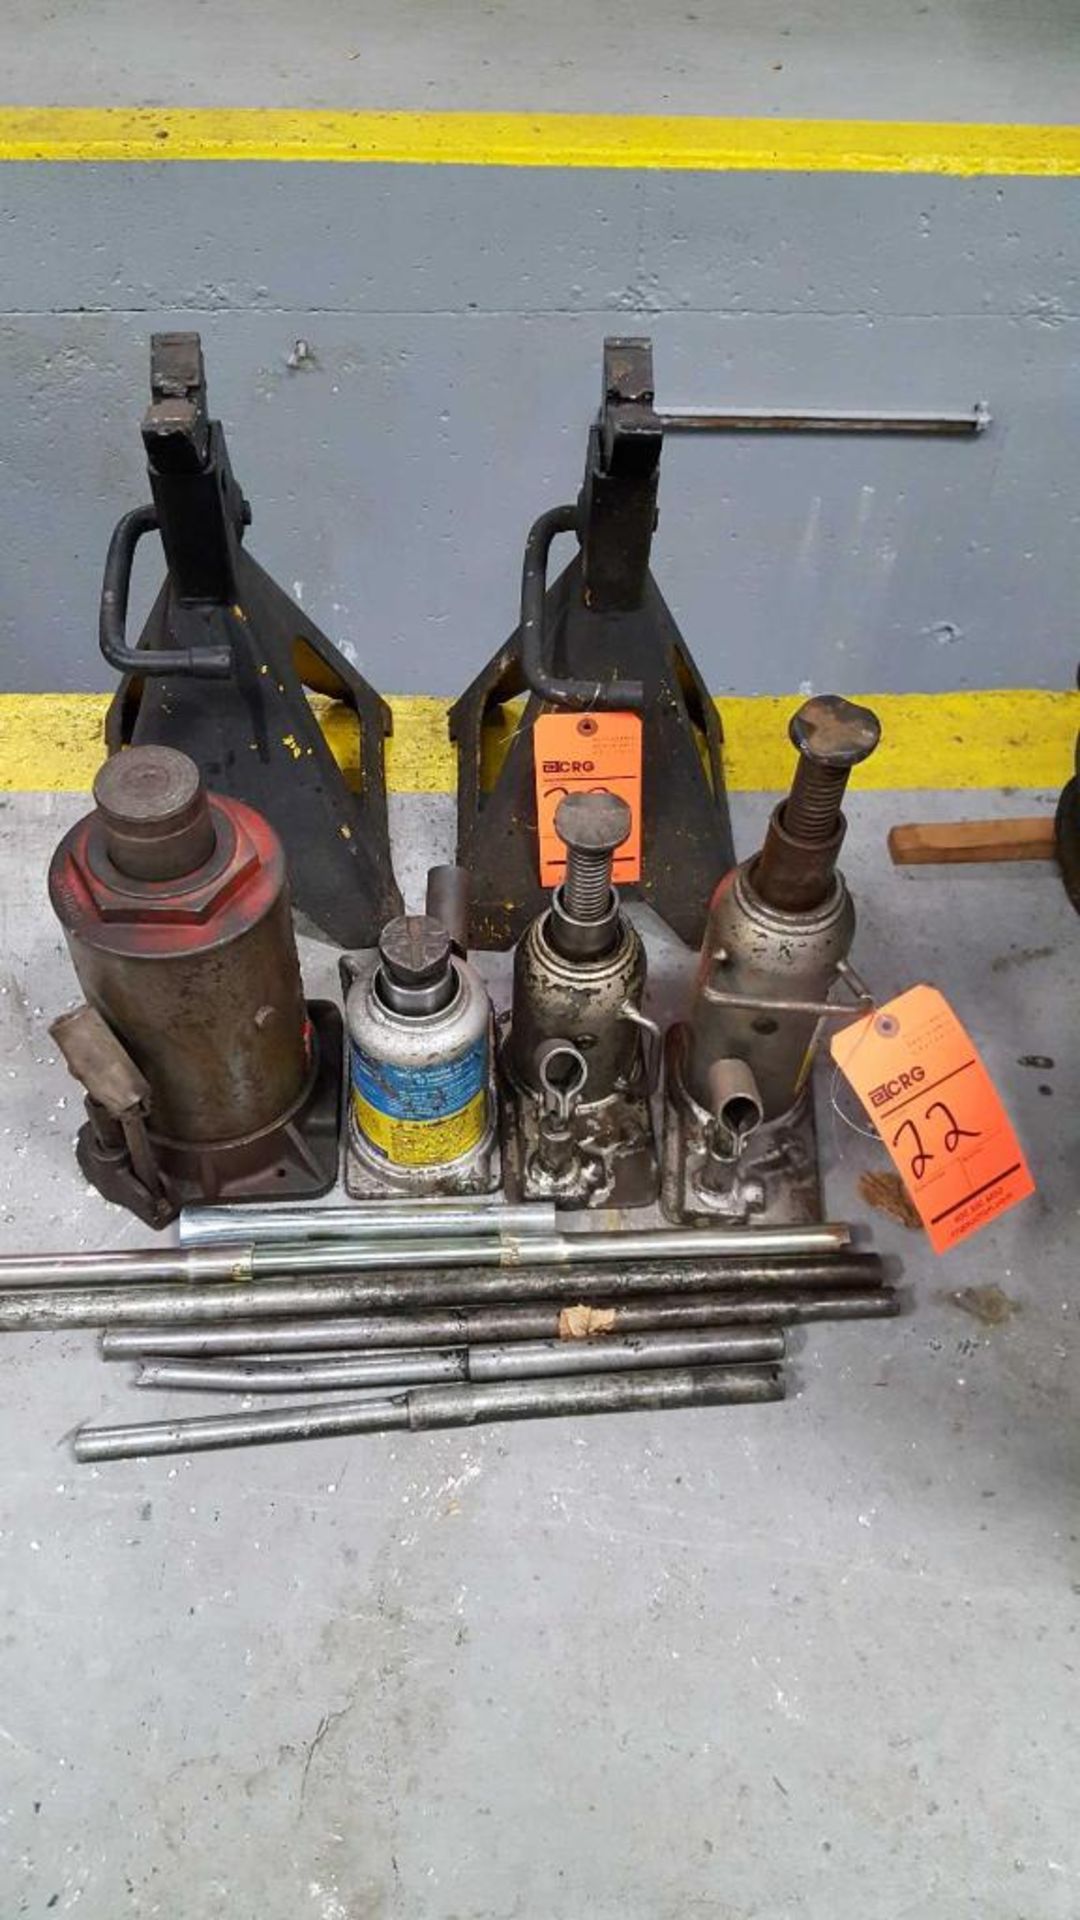 Lot contains (4) assorted hydraulic bottle jacks, and (1) pair of jack stands